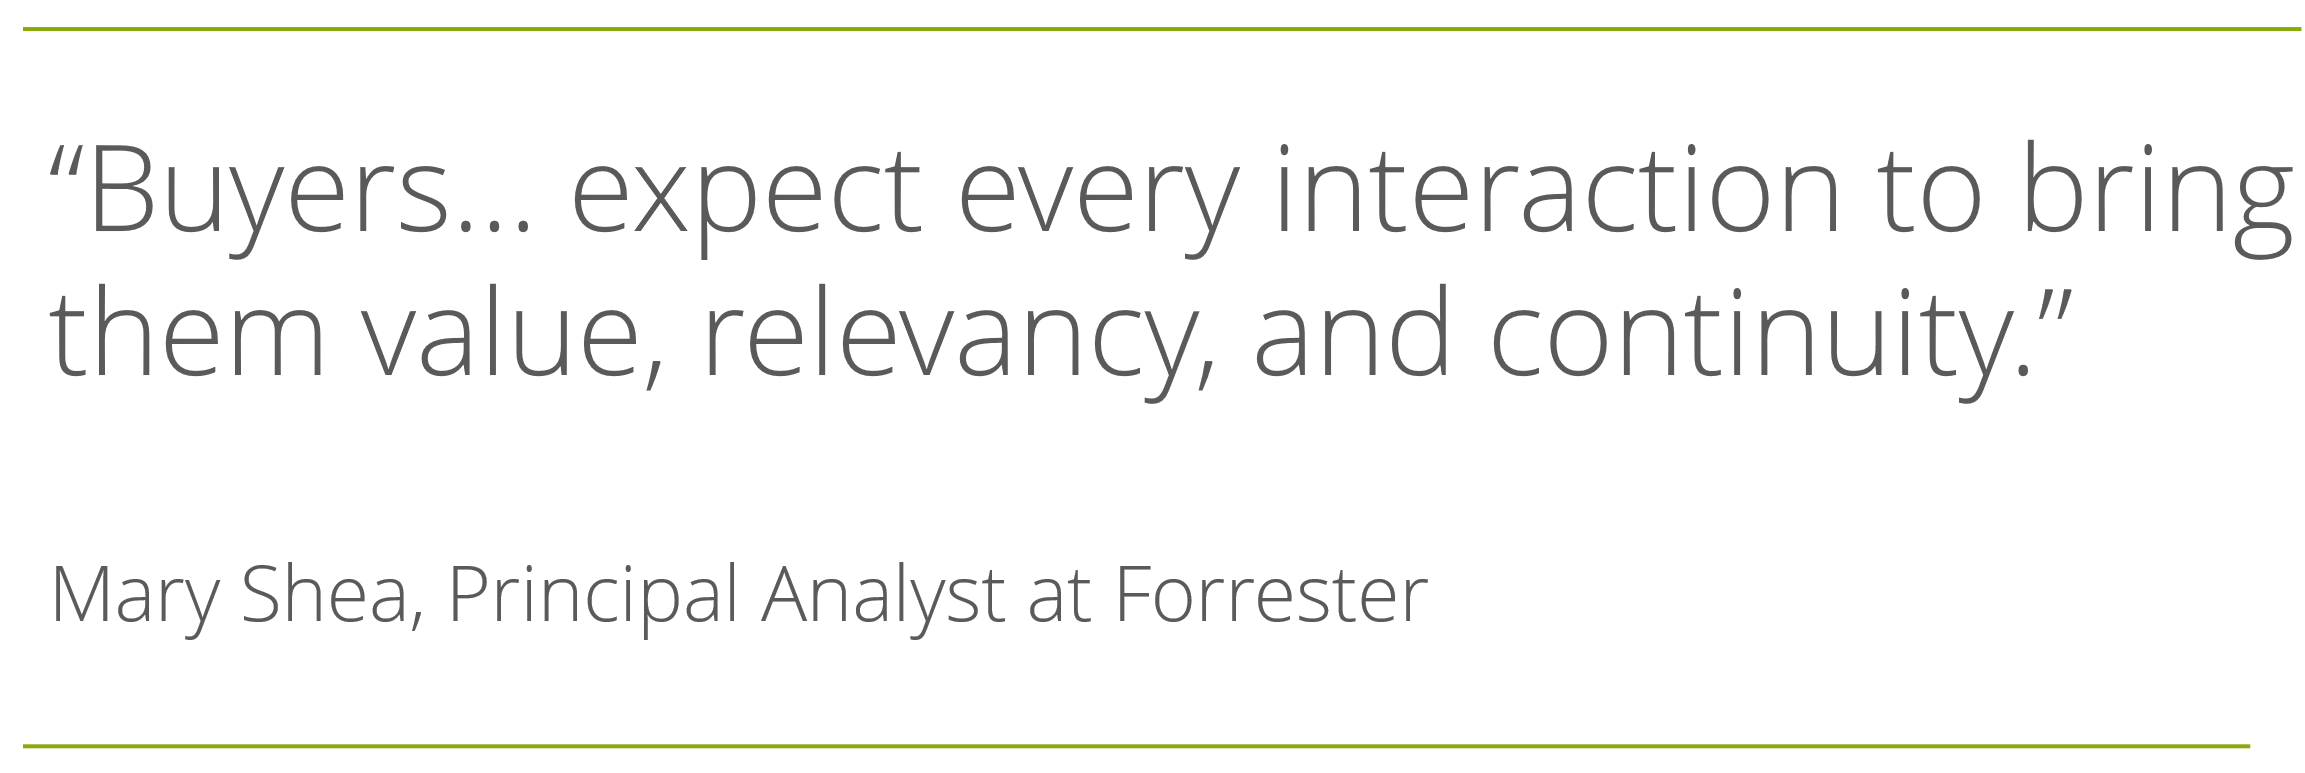 Forrester Quote-1